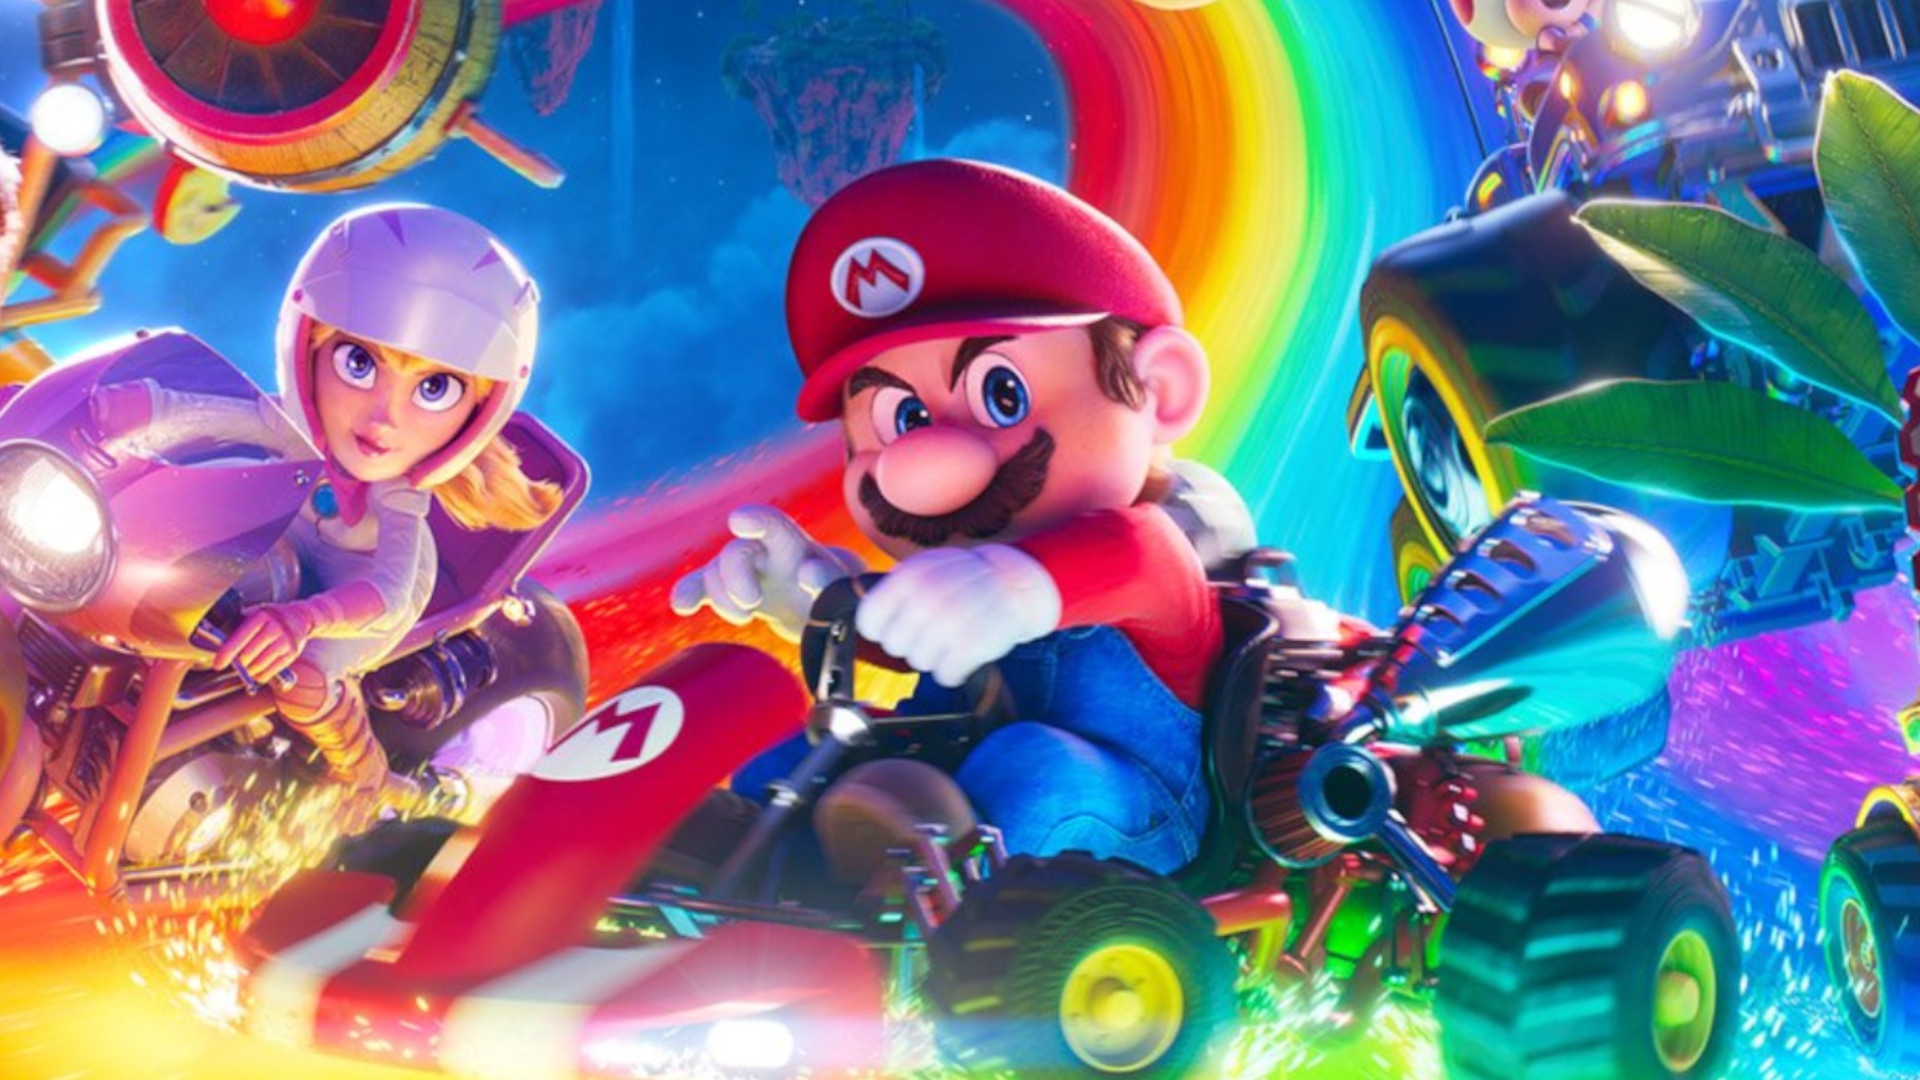 Video: Join us and play Mario Kart 8's DLC from 5pm GMT